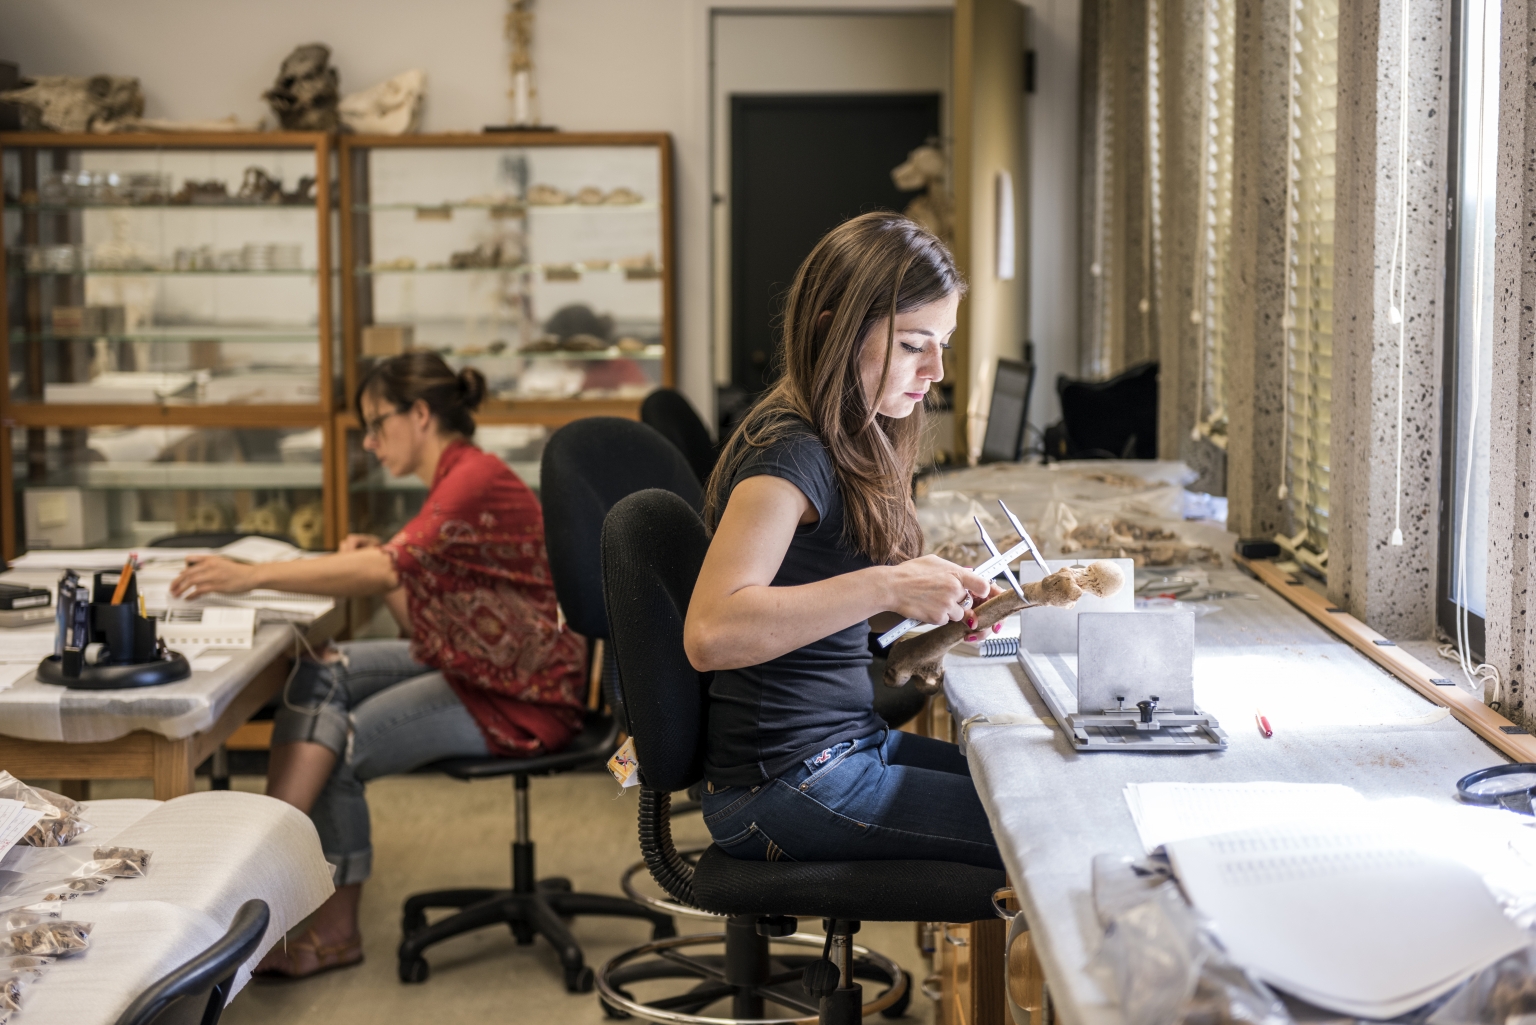 Forensic Anthropology graduate students Heather MacInnes, 33 (left) and Martha Diaz, 24, (right) work on human bones Human Identification Laboratory on Thursday, July 21, 2016 in Chico, Calif. The Human Identification Laboratory provides forensic anthropology services to state and federal law enforcement, medical examiners and attorneys. These services include search and recovery of human remains, skeletal analysis for the purposes of identification and trauma analysis. (Jason Halley/University Photographer)